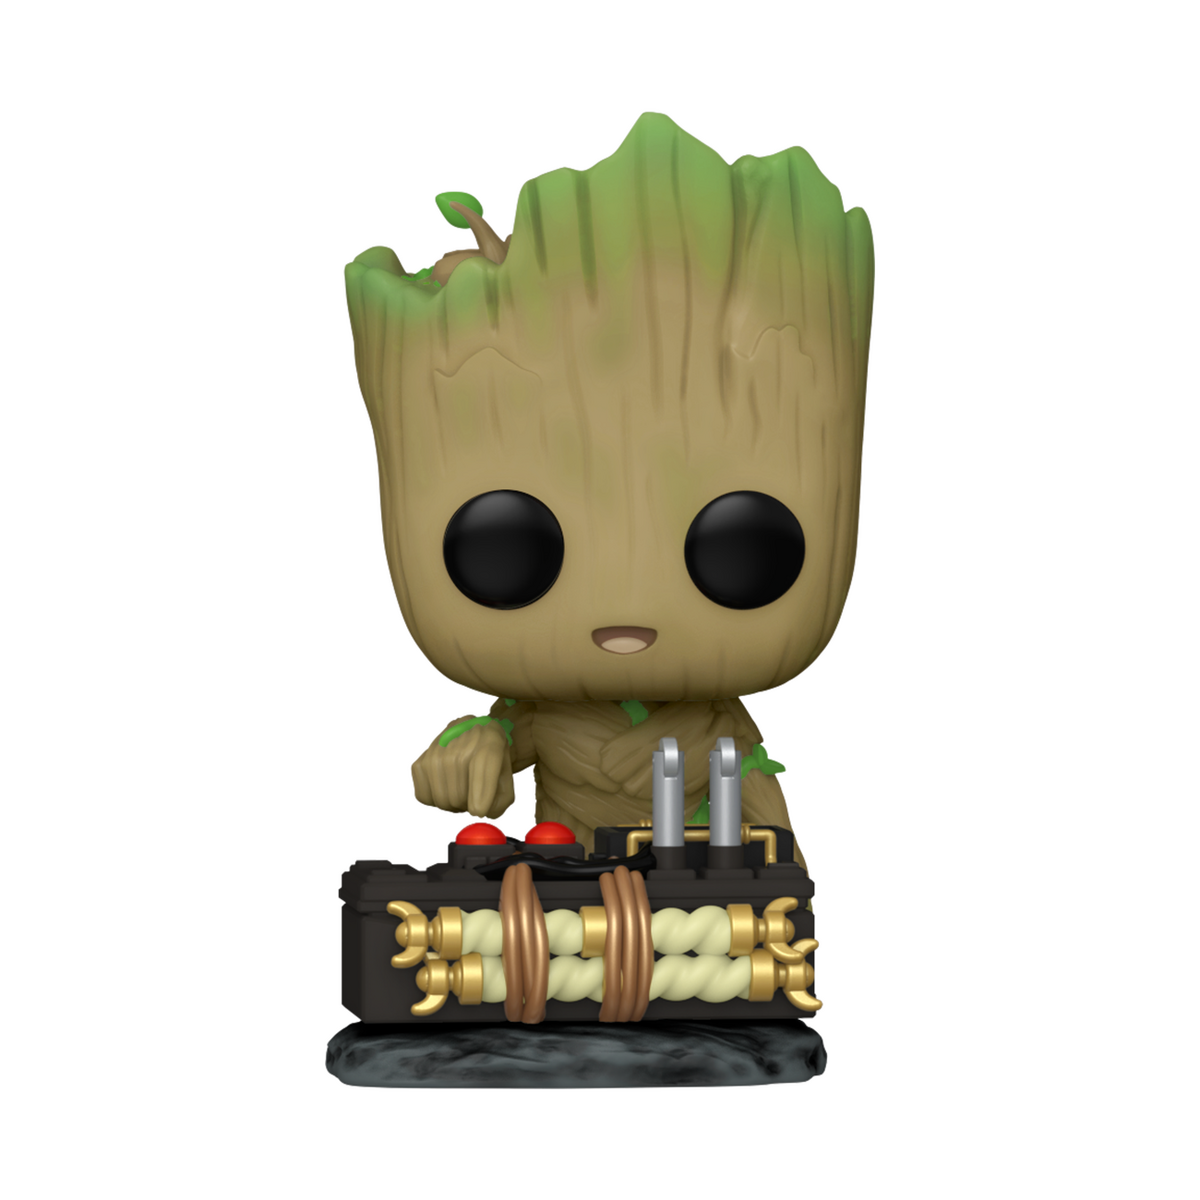 #1222 Marvel - Guardians of the Galaxy - Groot w/ Bomb WonderCon Excl.